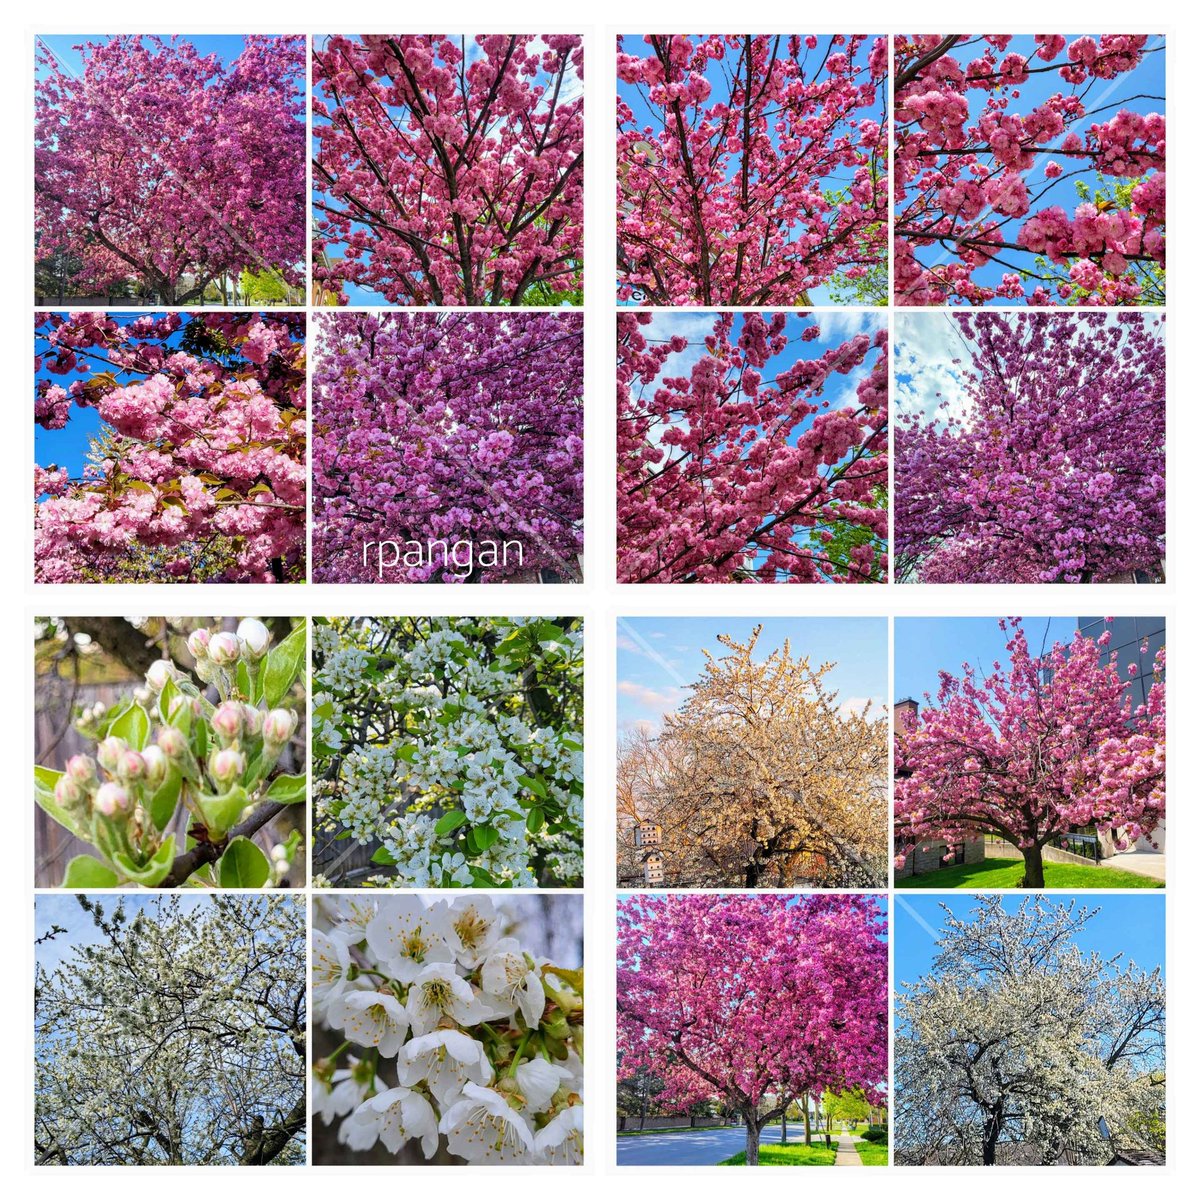 Blossoms, blossoms, blossoms in #mygarden and around the city! Happy #FlowersOnFriday !
#cherryblossoms #sakurablossoms #pearblossoms #plumblossoms #gardenersworld #springblossoms #FlowersOfTwitter #GoodMorningWorld #springtime #favoriteseason